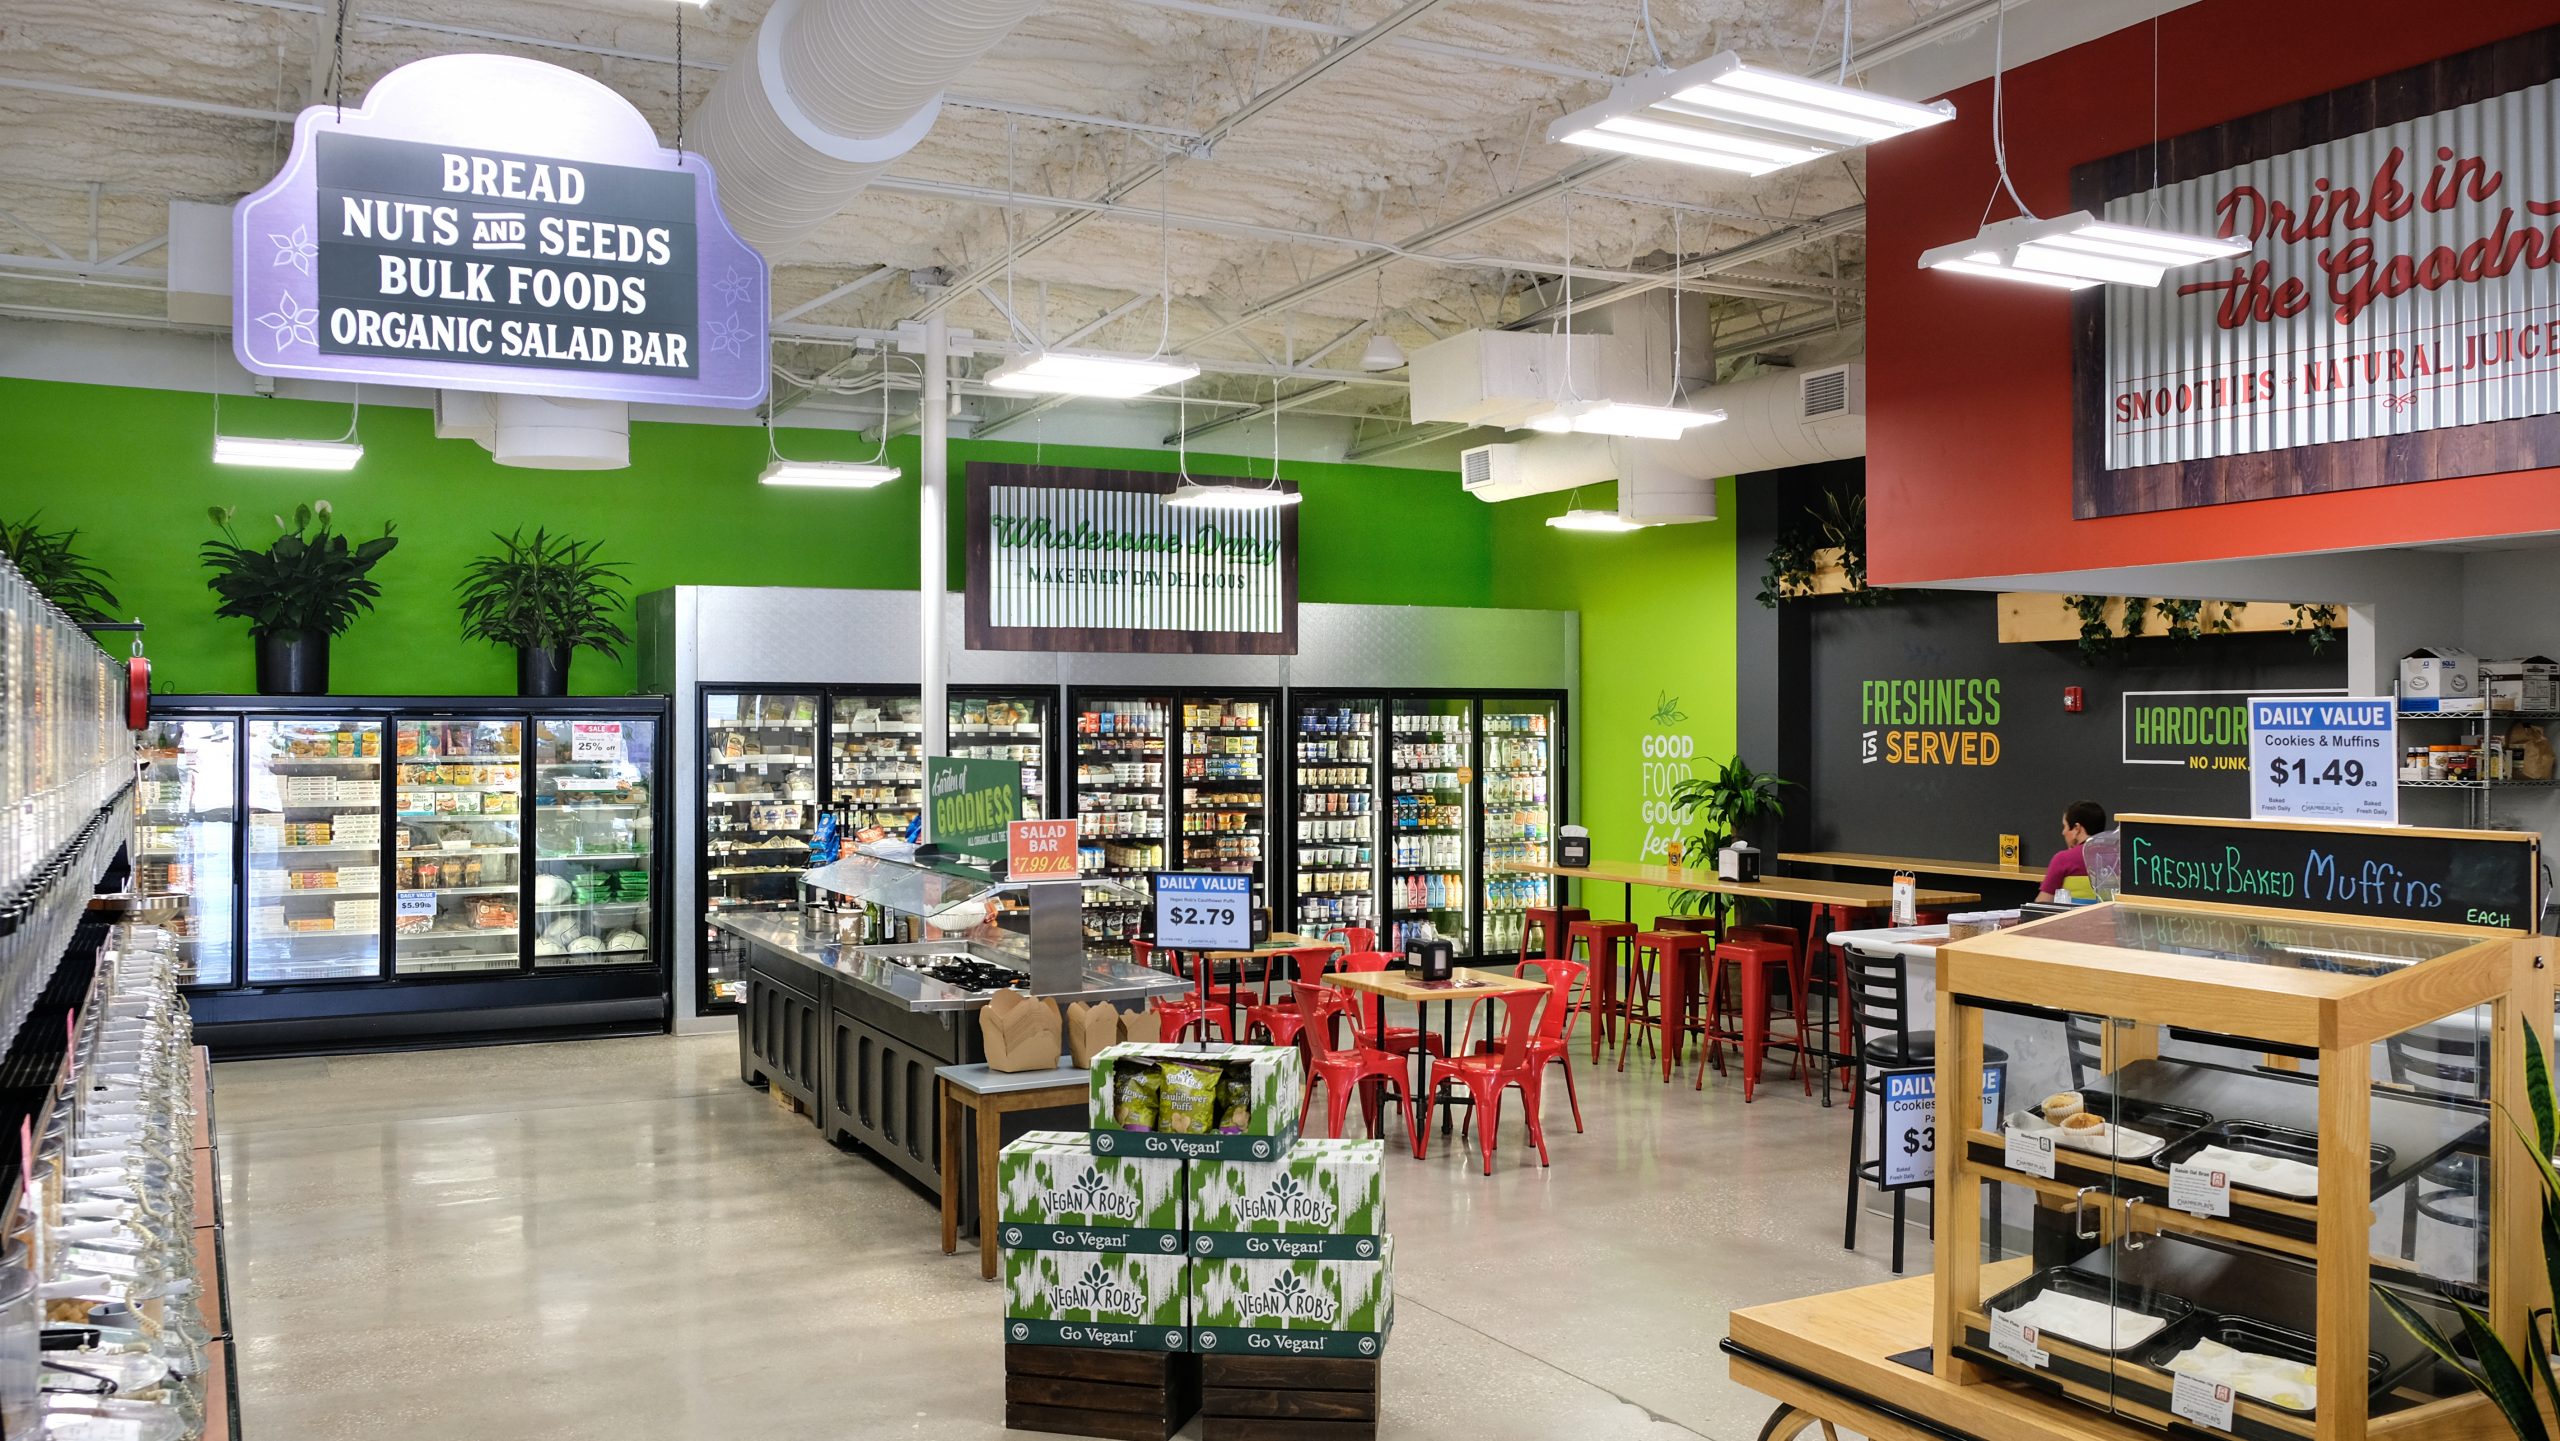 To bring the brand to life inside the stores, we designed environmental graphics and wayfinding signage, as well as selected paint colors, furniture accents and other interior design elements. 